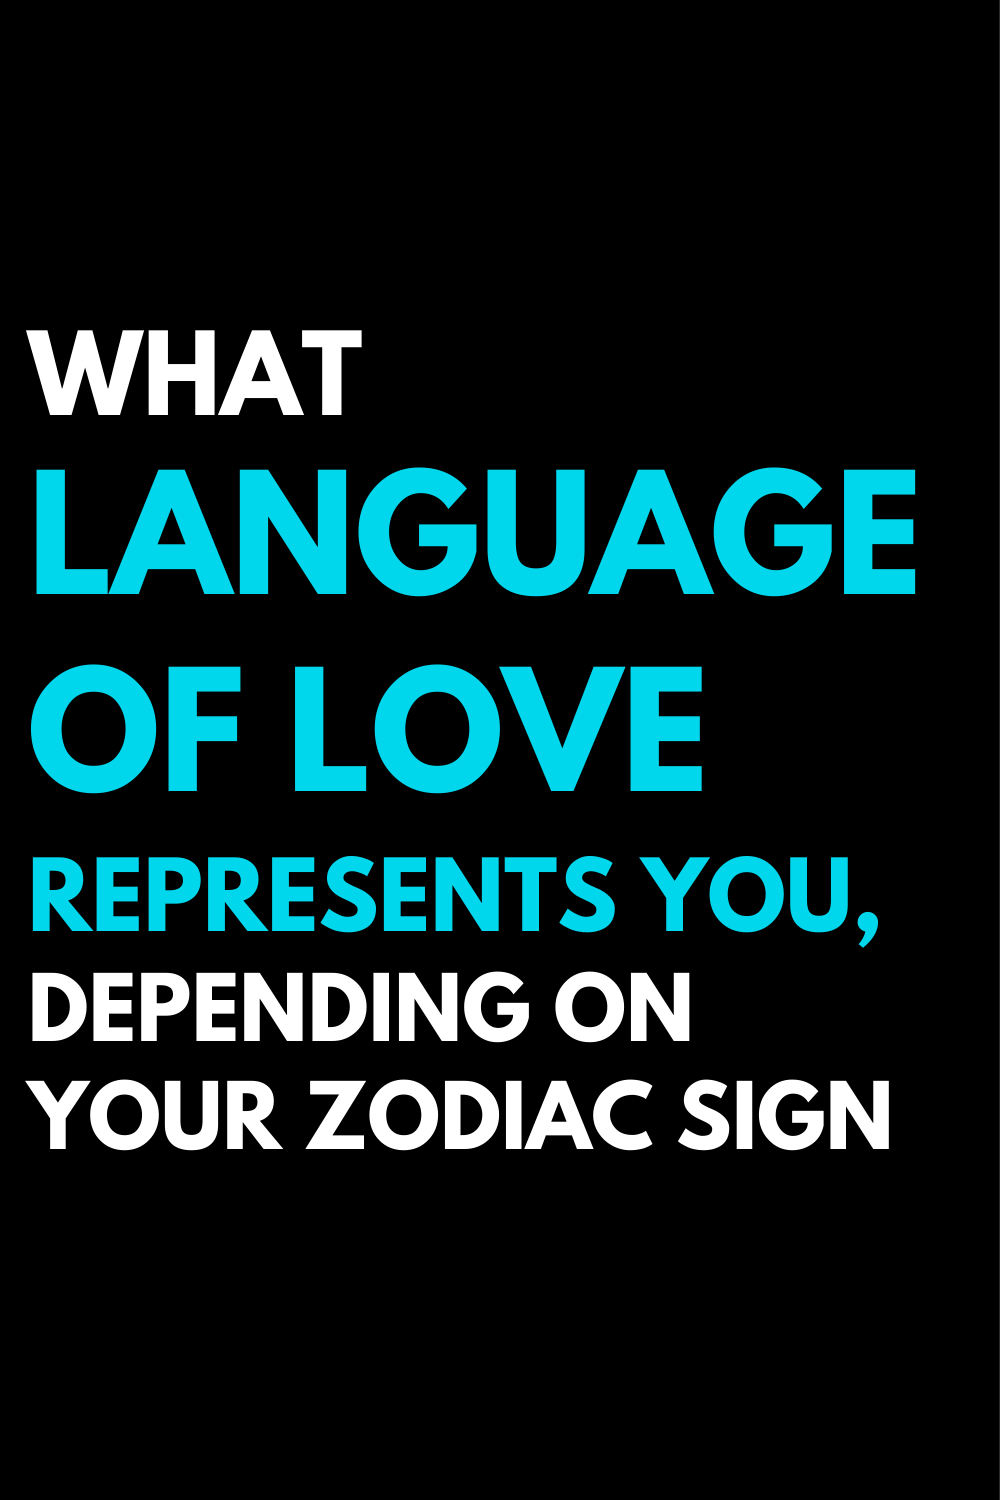 What language of love represents you, depending on your zodiac sign